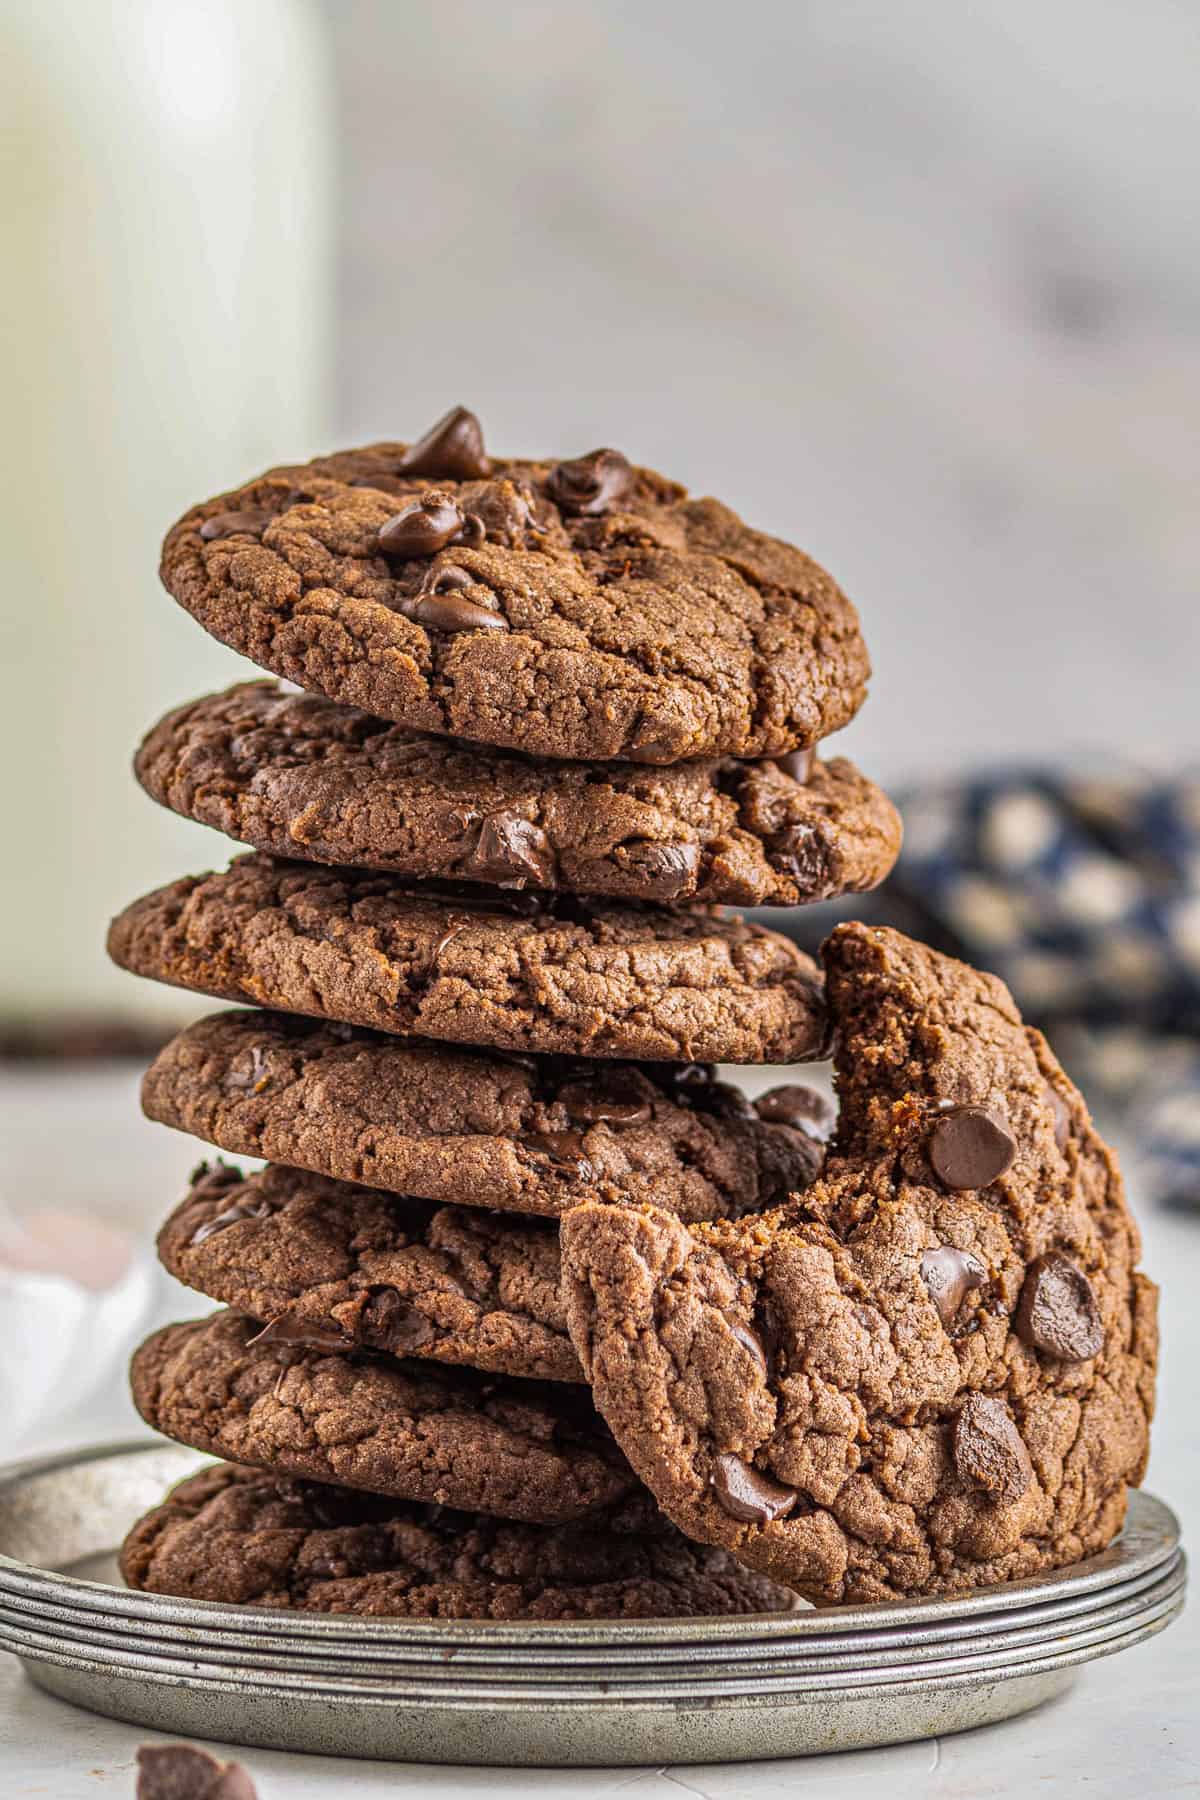 stack of chocolate cookies with chocolate chips with a cookie on the side with a bite taken